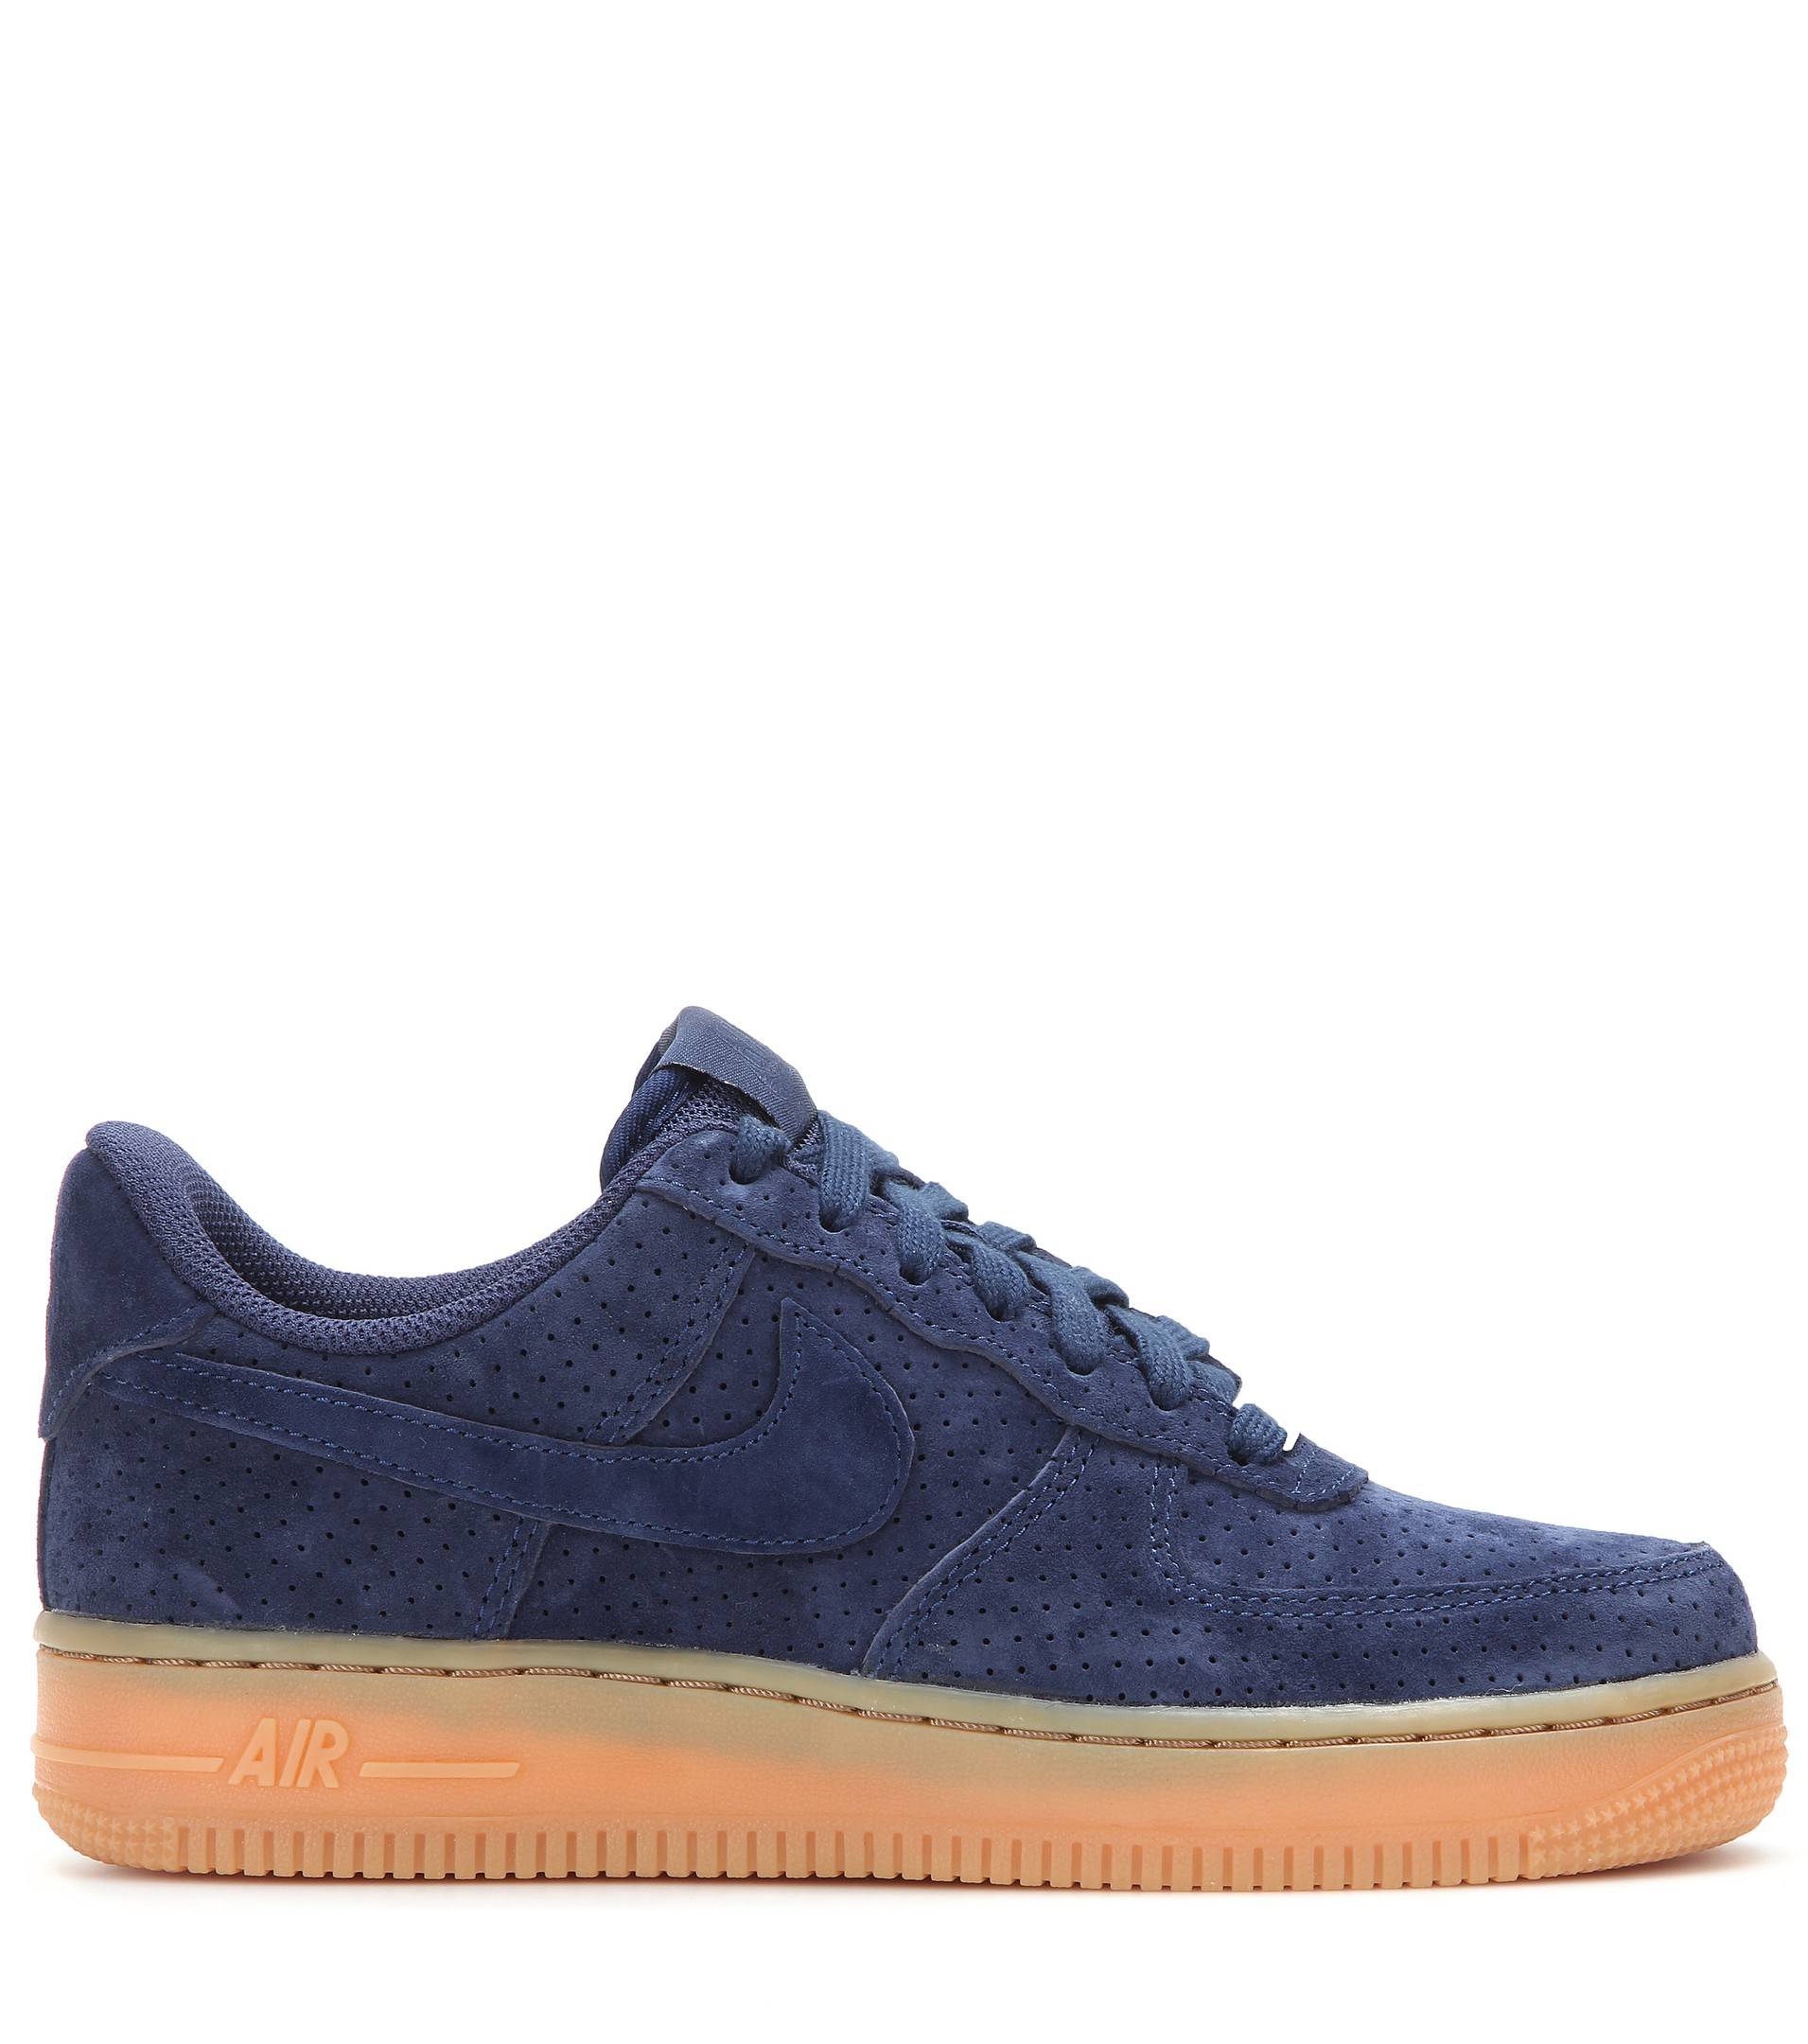 nike air force 1 upstep premium trainers in blue suede